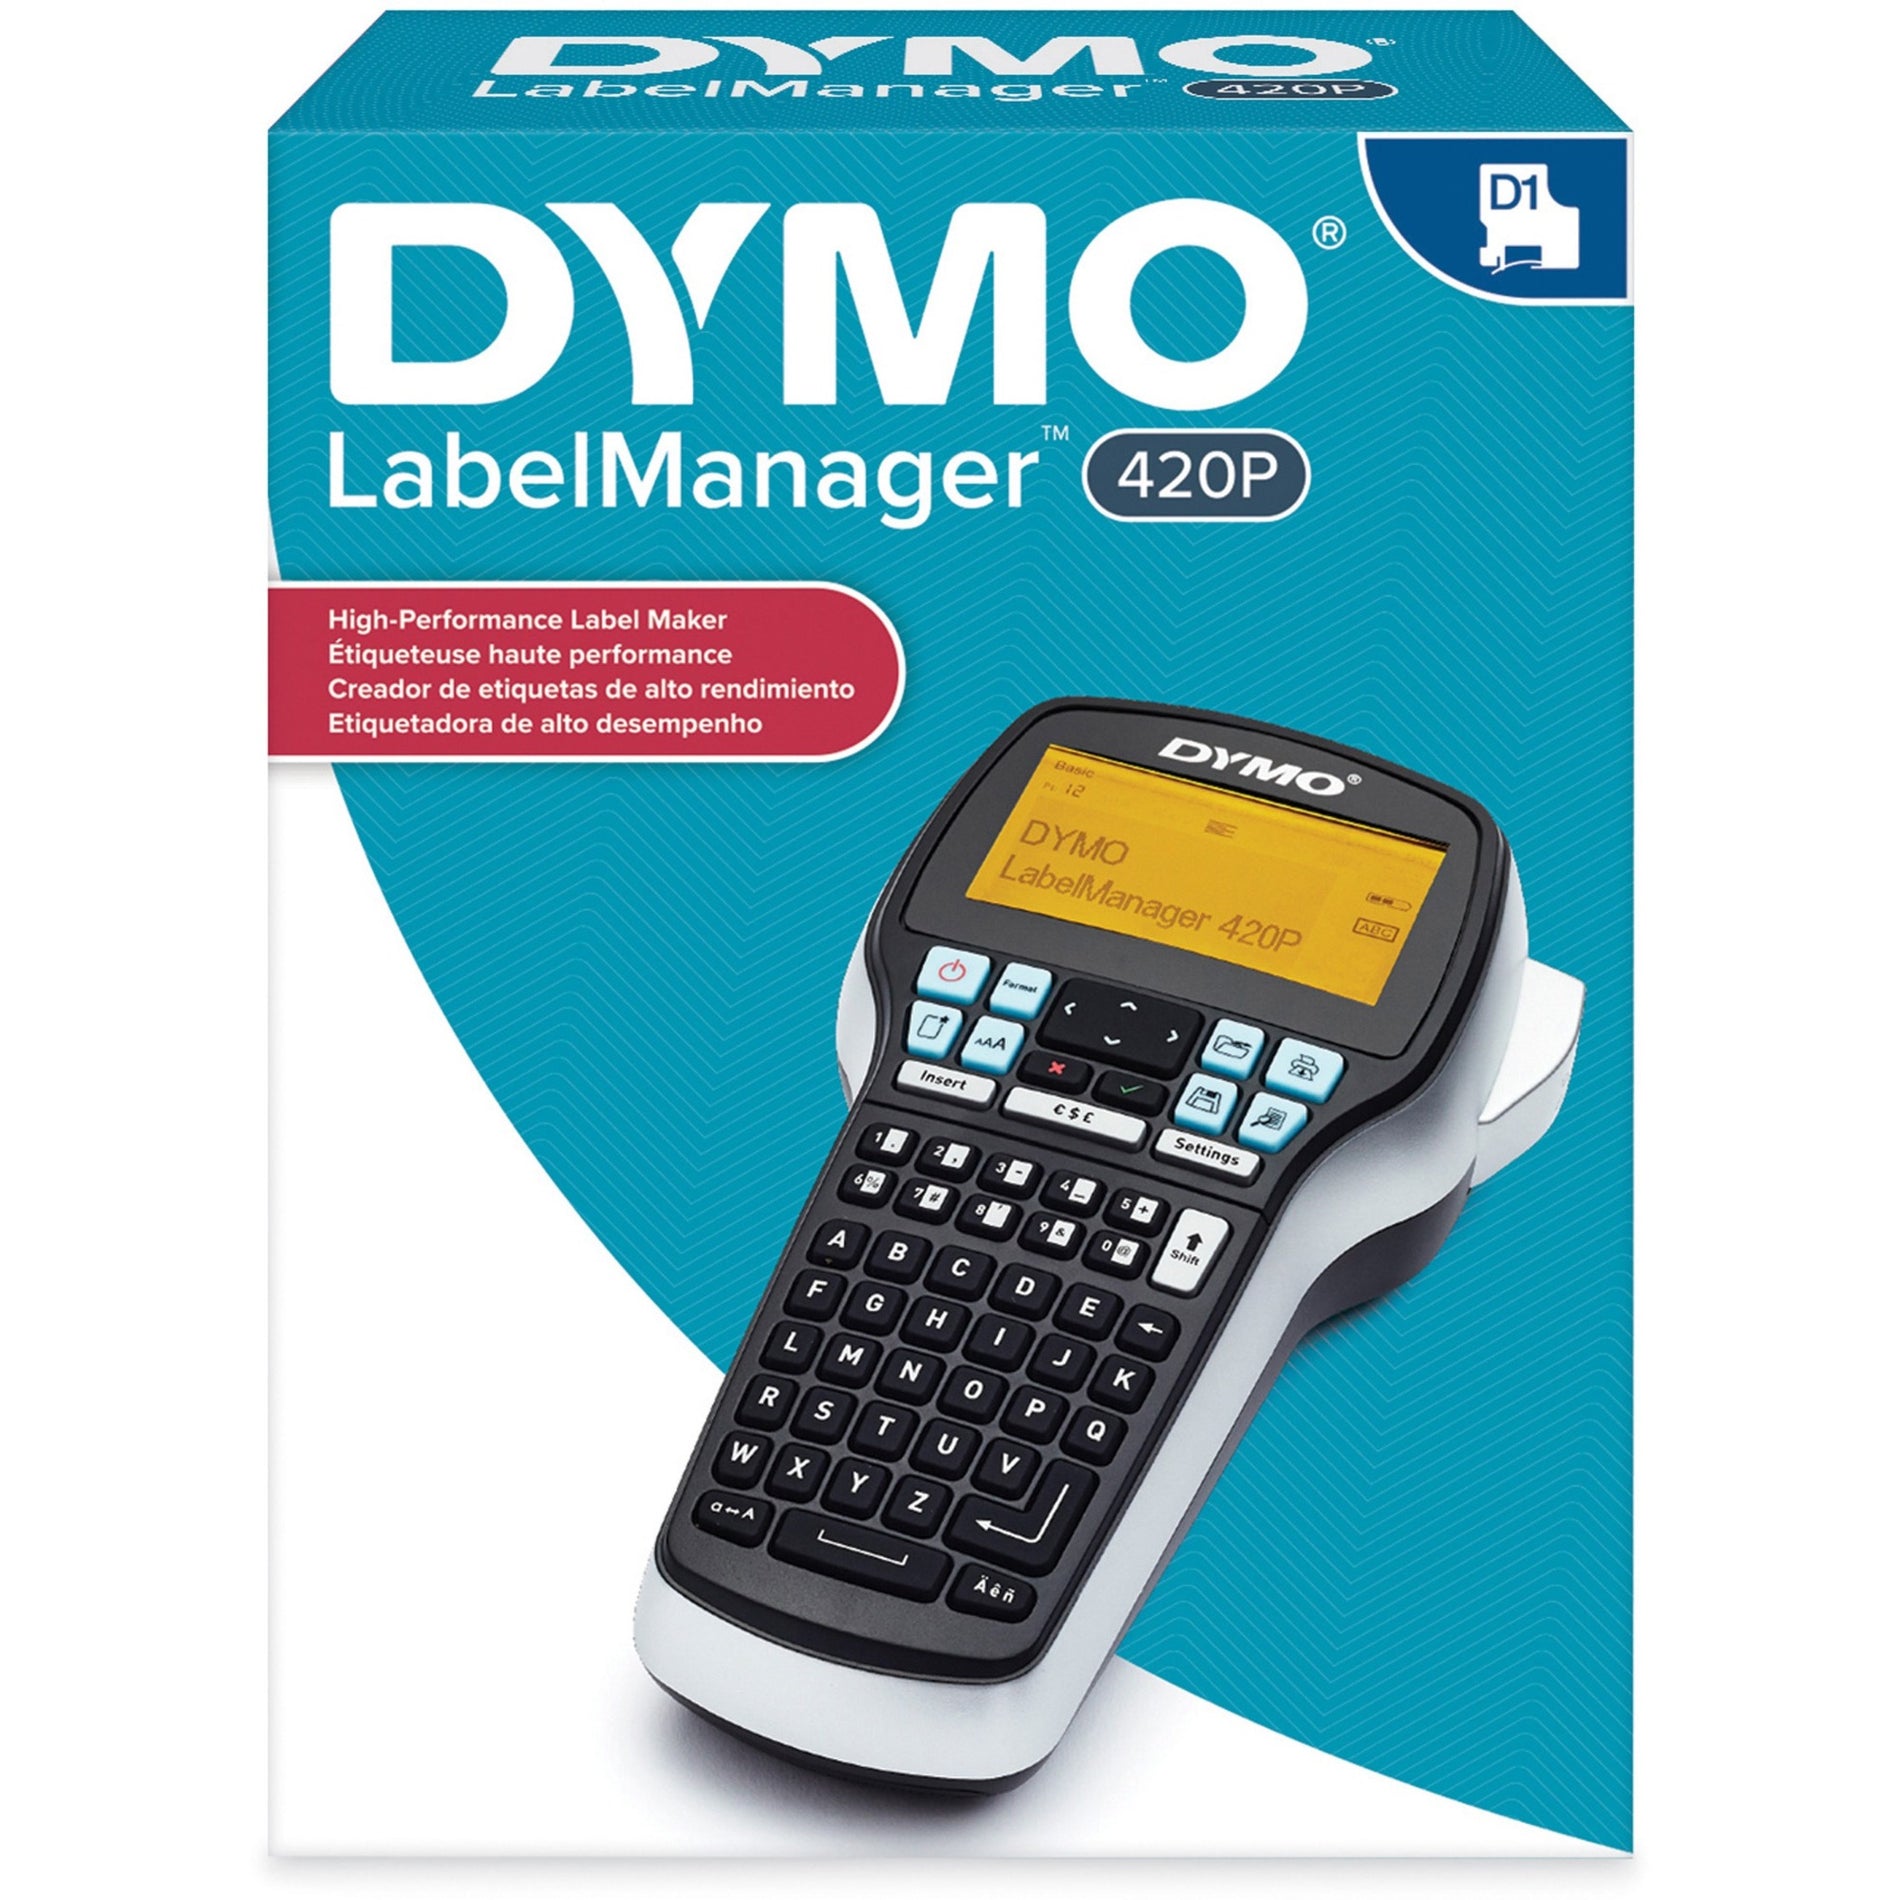 Dymo 1768815 LabelManager 420P Portable Labelmaker, LCD Display, USB Connectivity